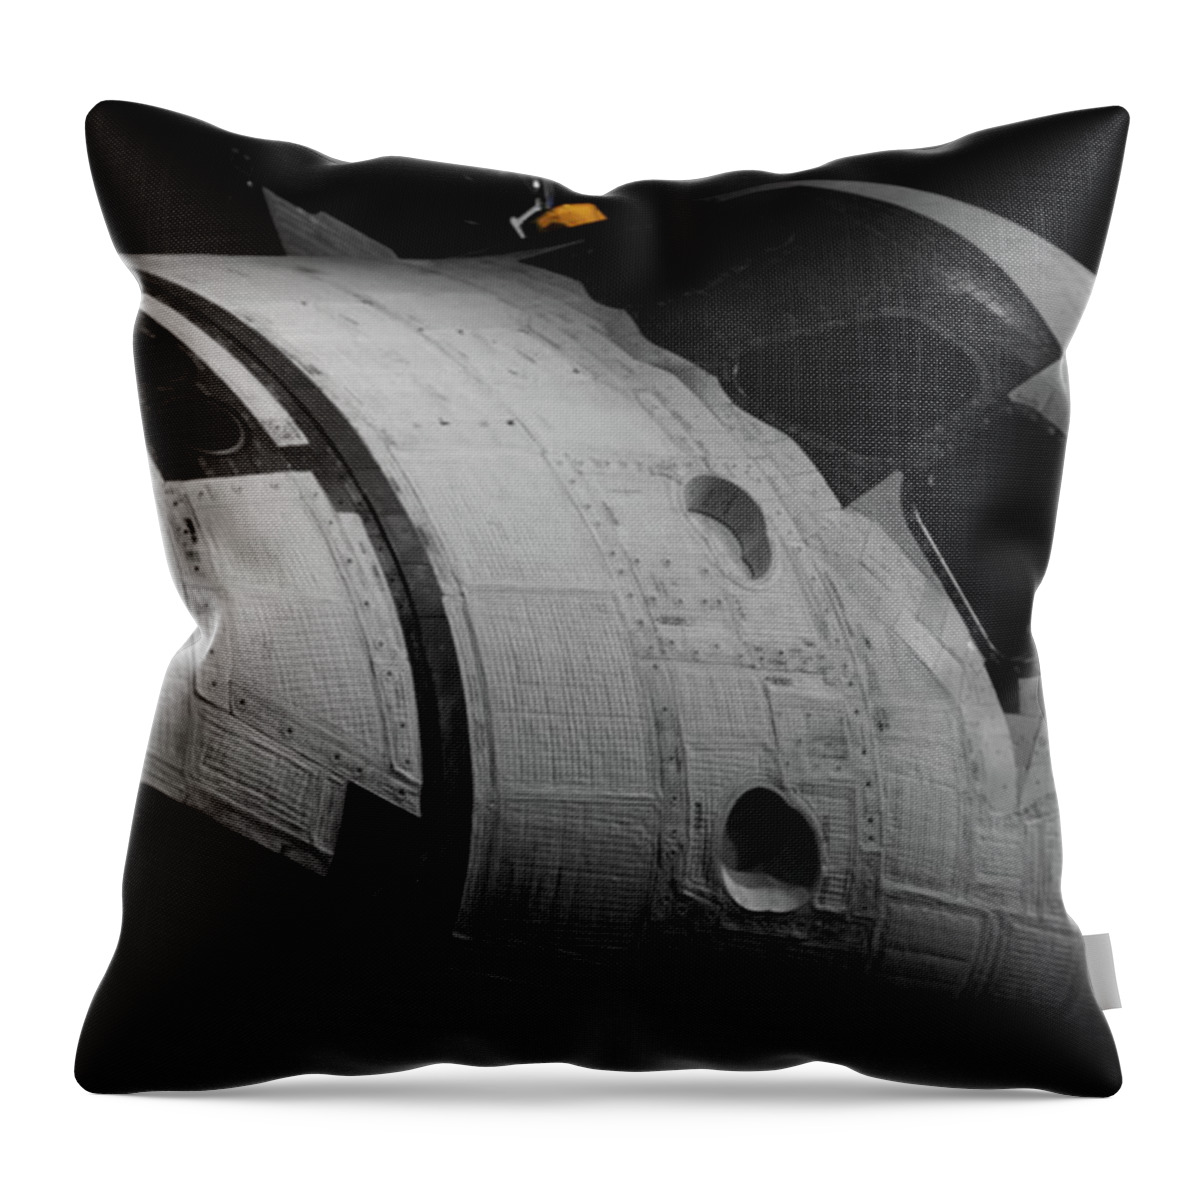 Space Center Throw Pillow featuring the photograph Atlantis by Gary Gunderson